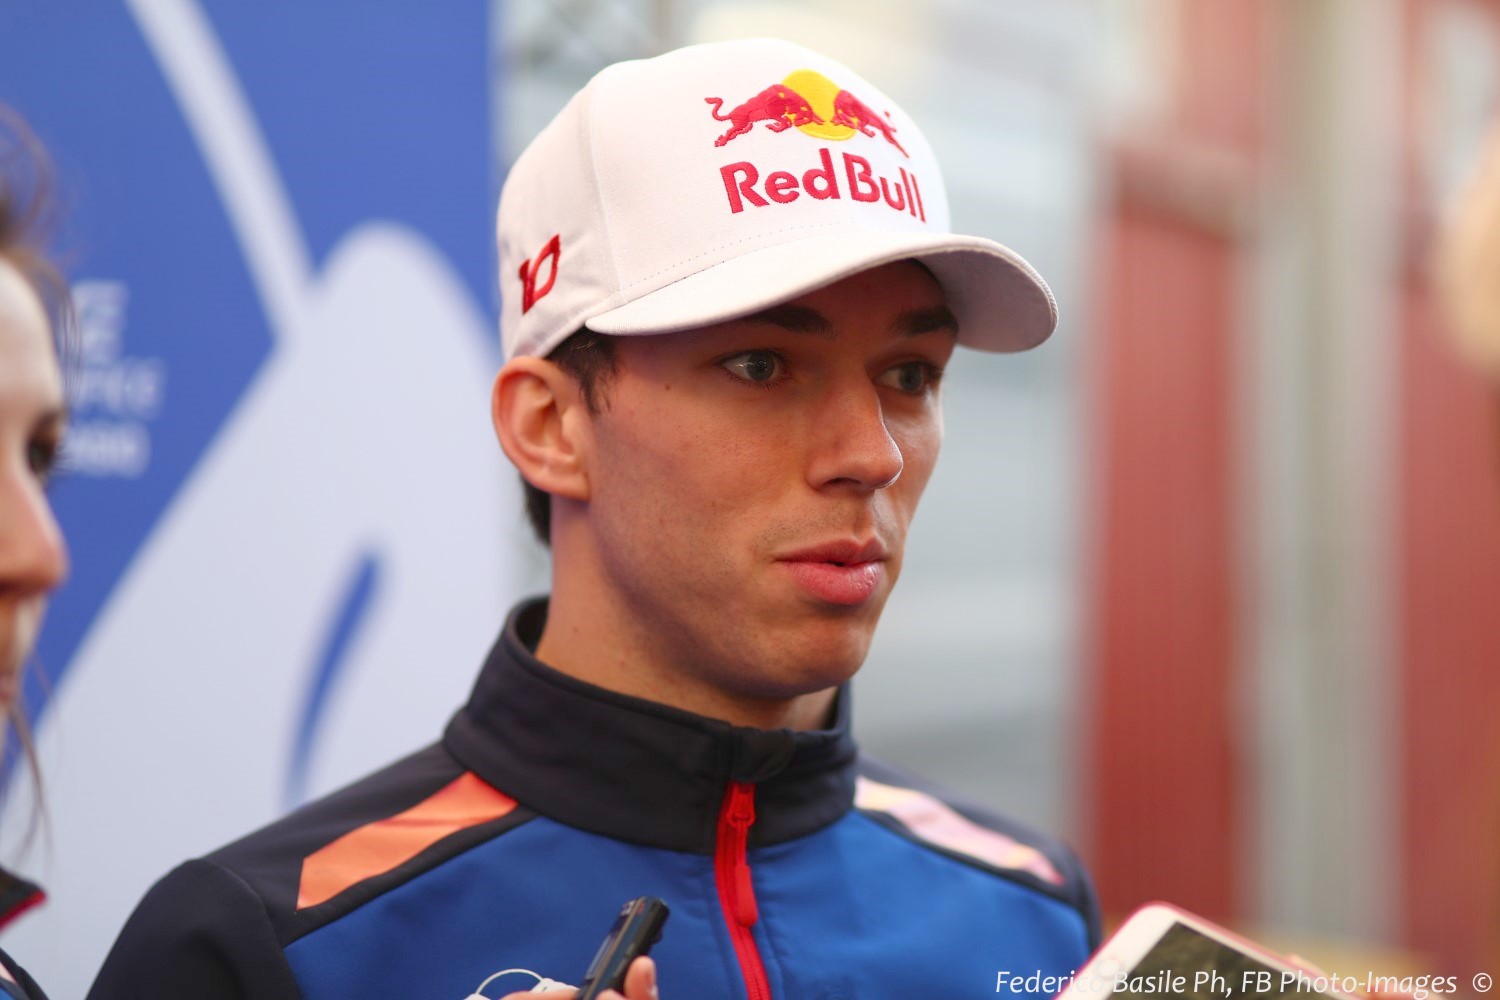 The Honda engine is improving and Pierre Gasly is showing his meddle